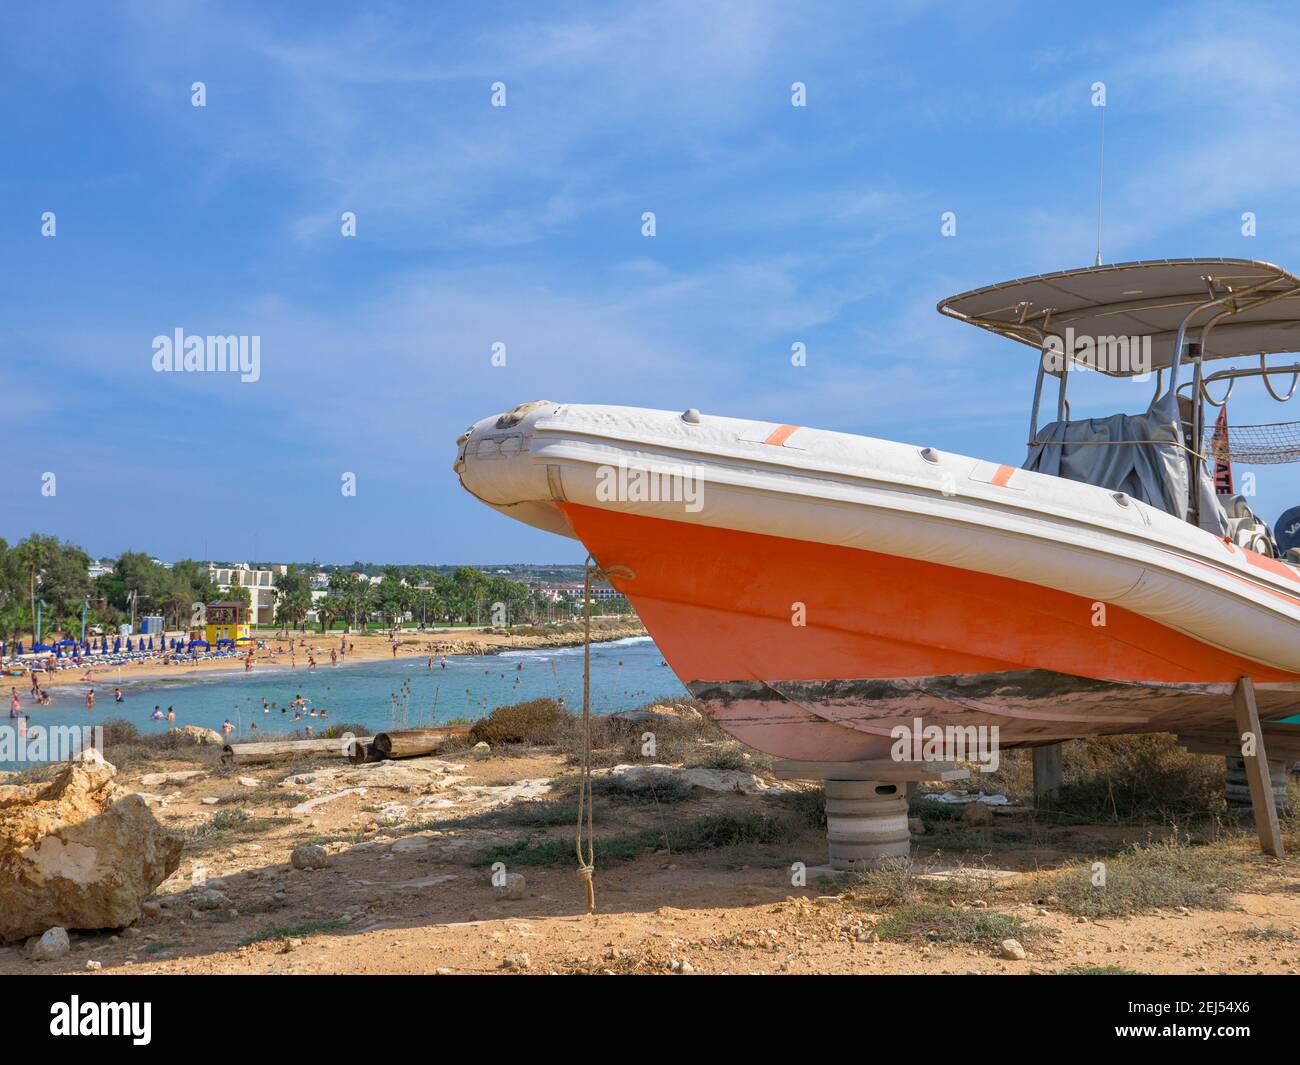 Orange and white powerboat standing on tires and wooden supports at the shore in Ayia Napa. Mediterranean sea in the background. Stock Photo